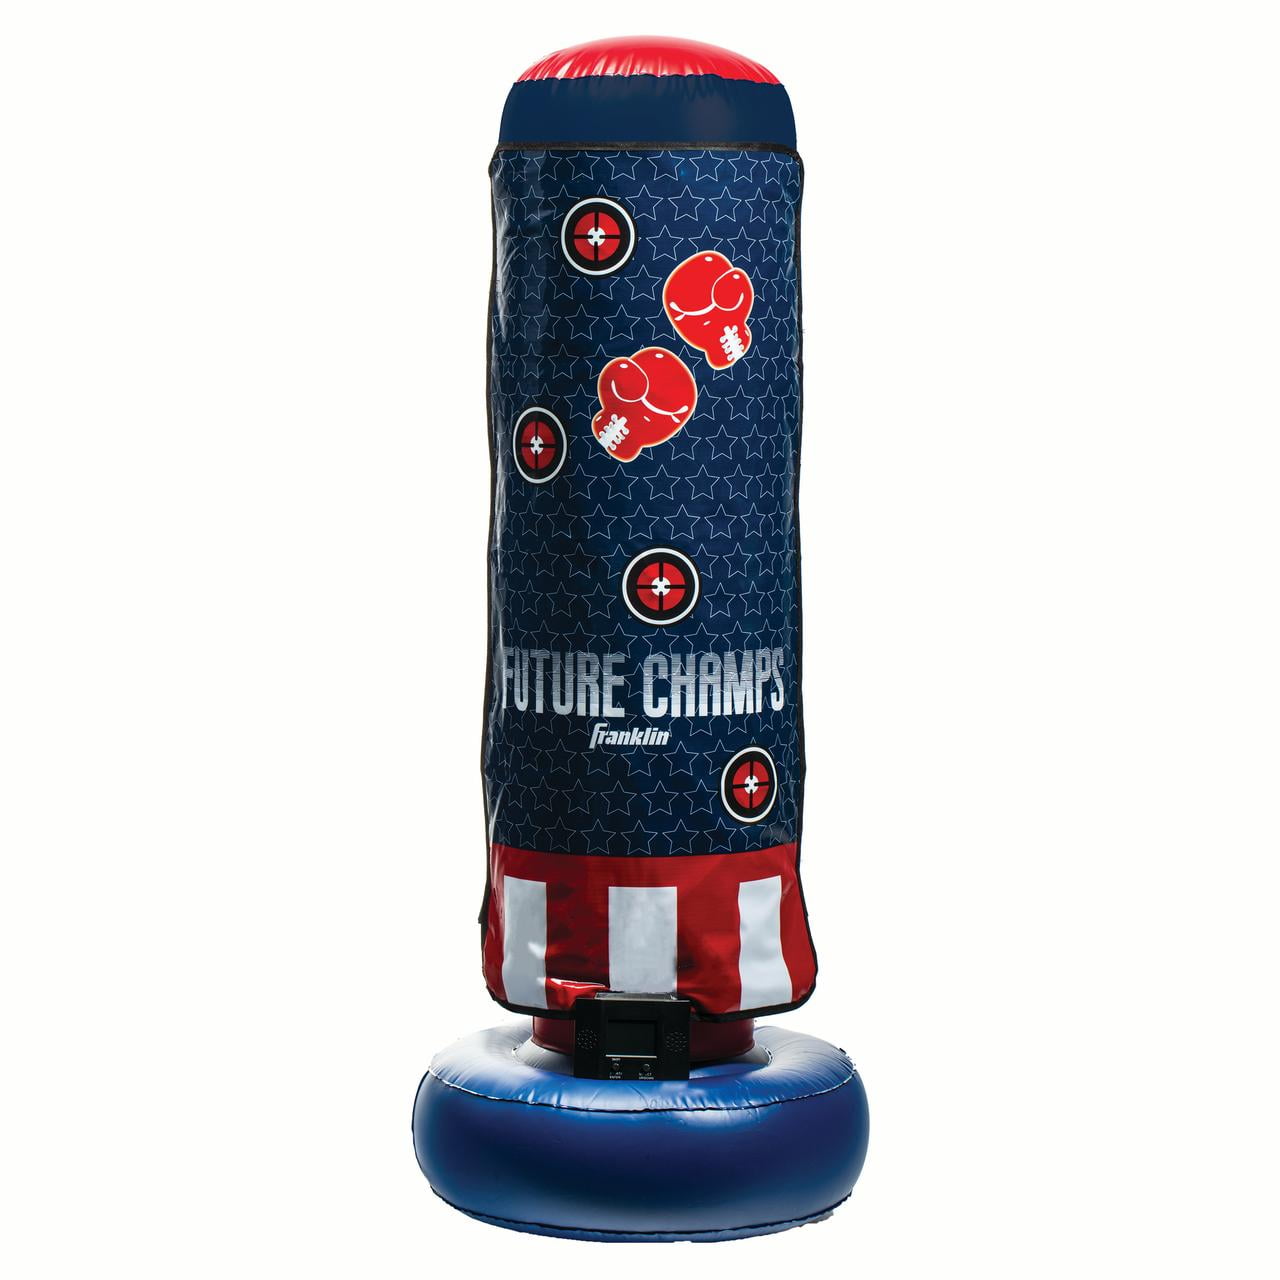 Quiet Punch  Smart Home Punching Bag